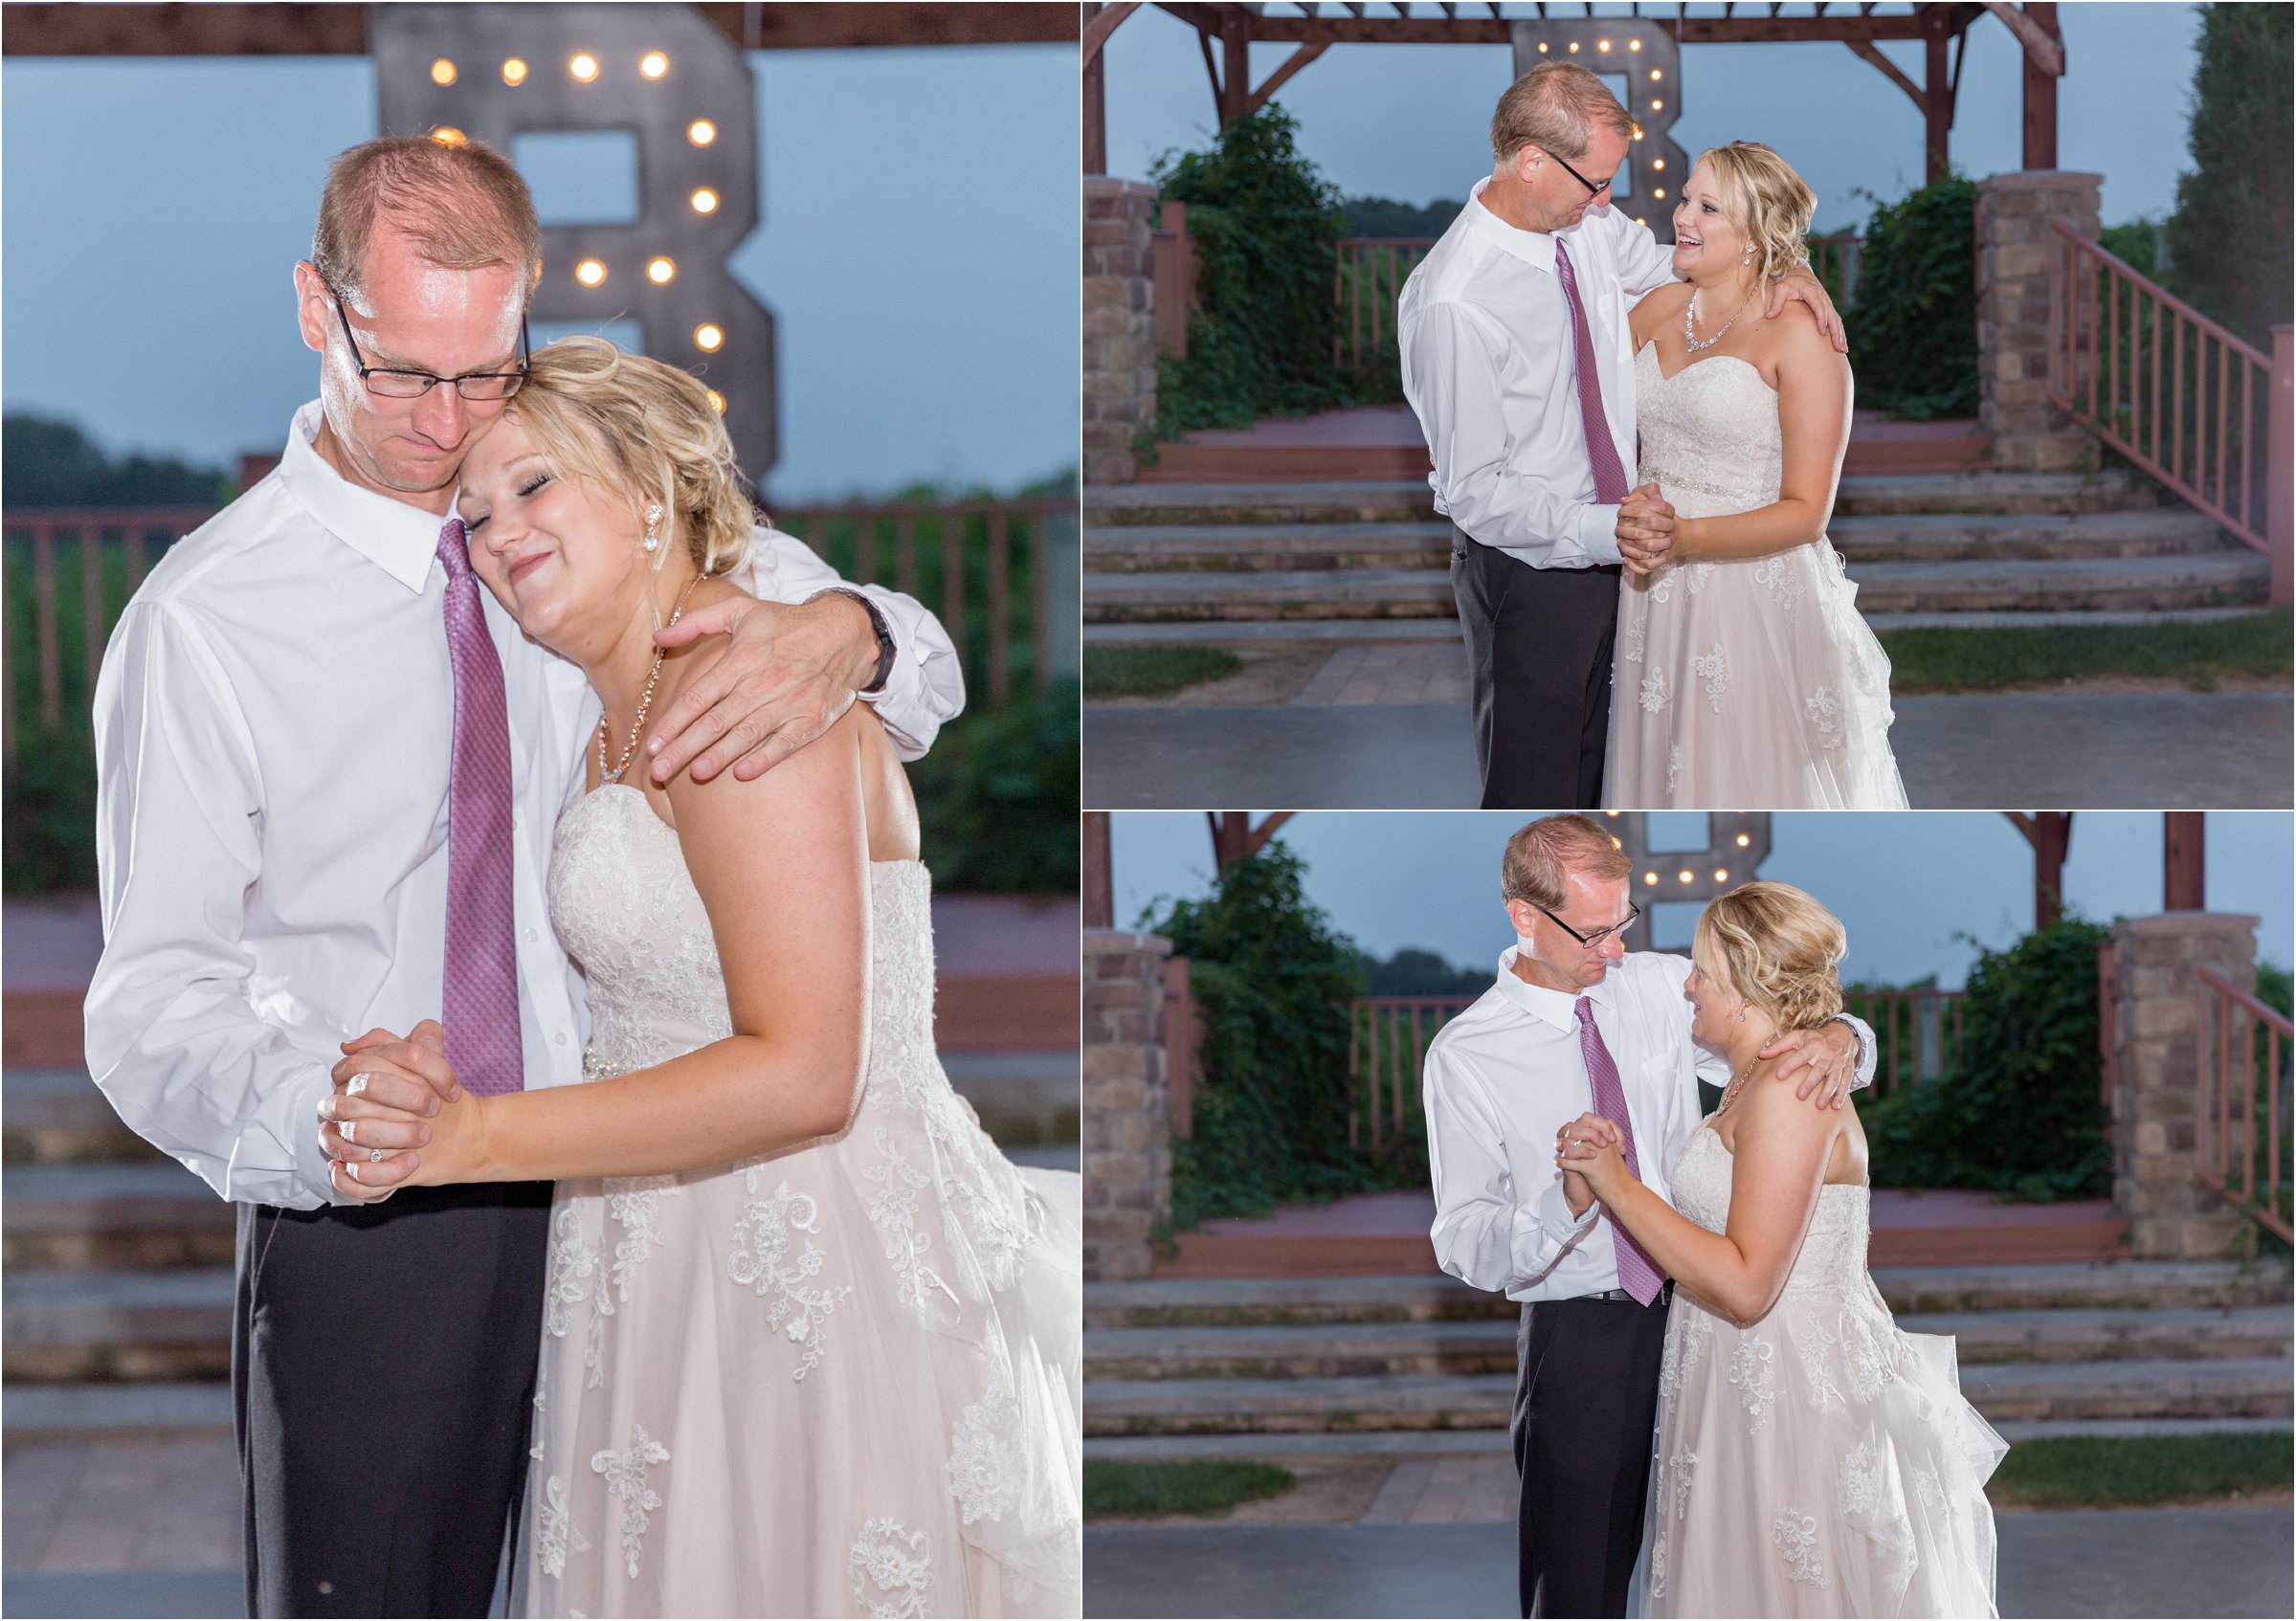 bride dances with her father at her own wedding reception